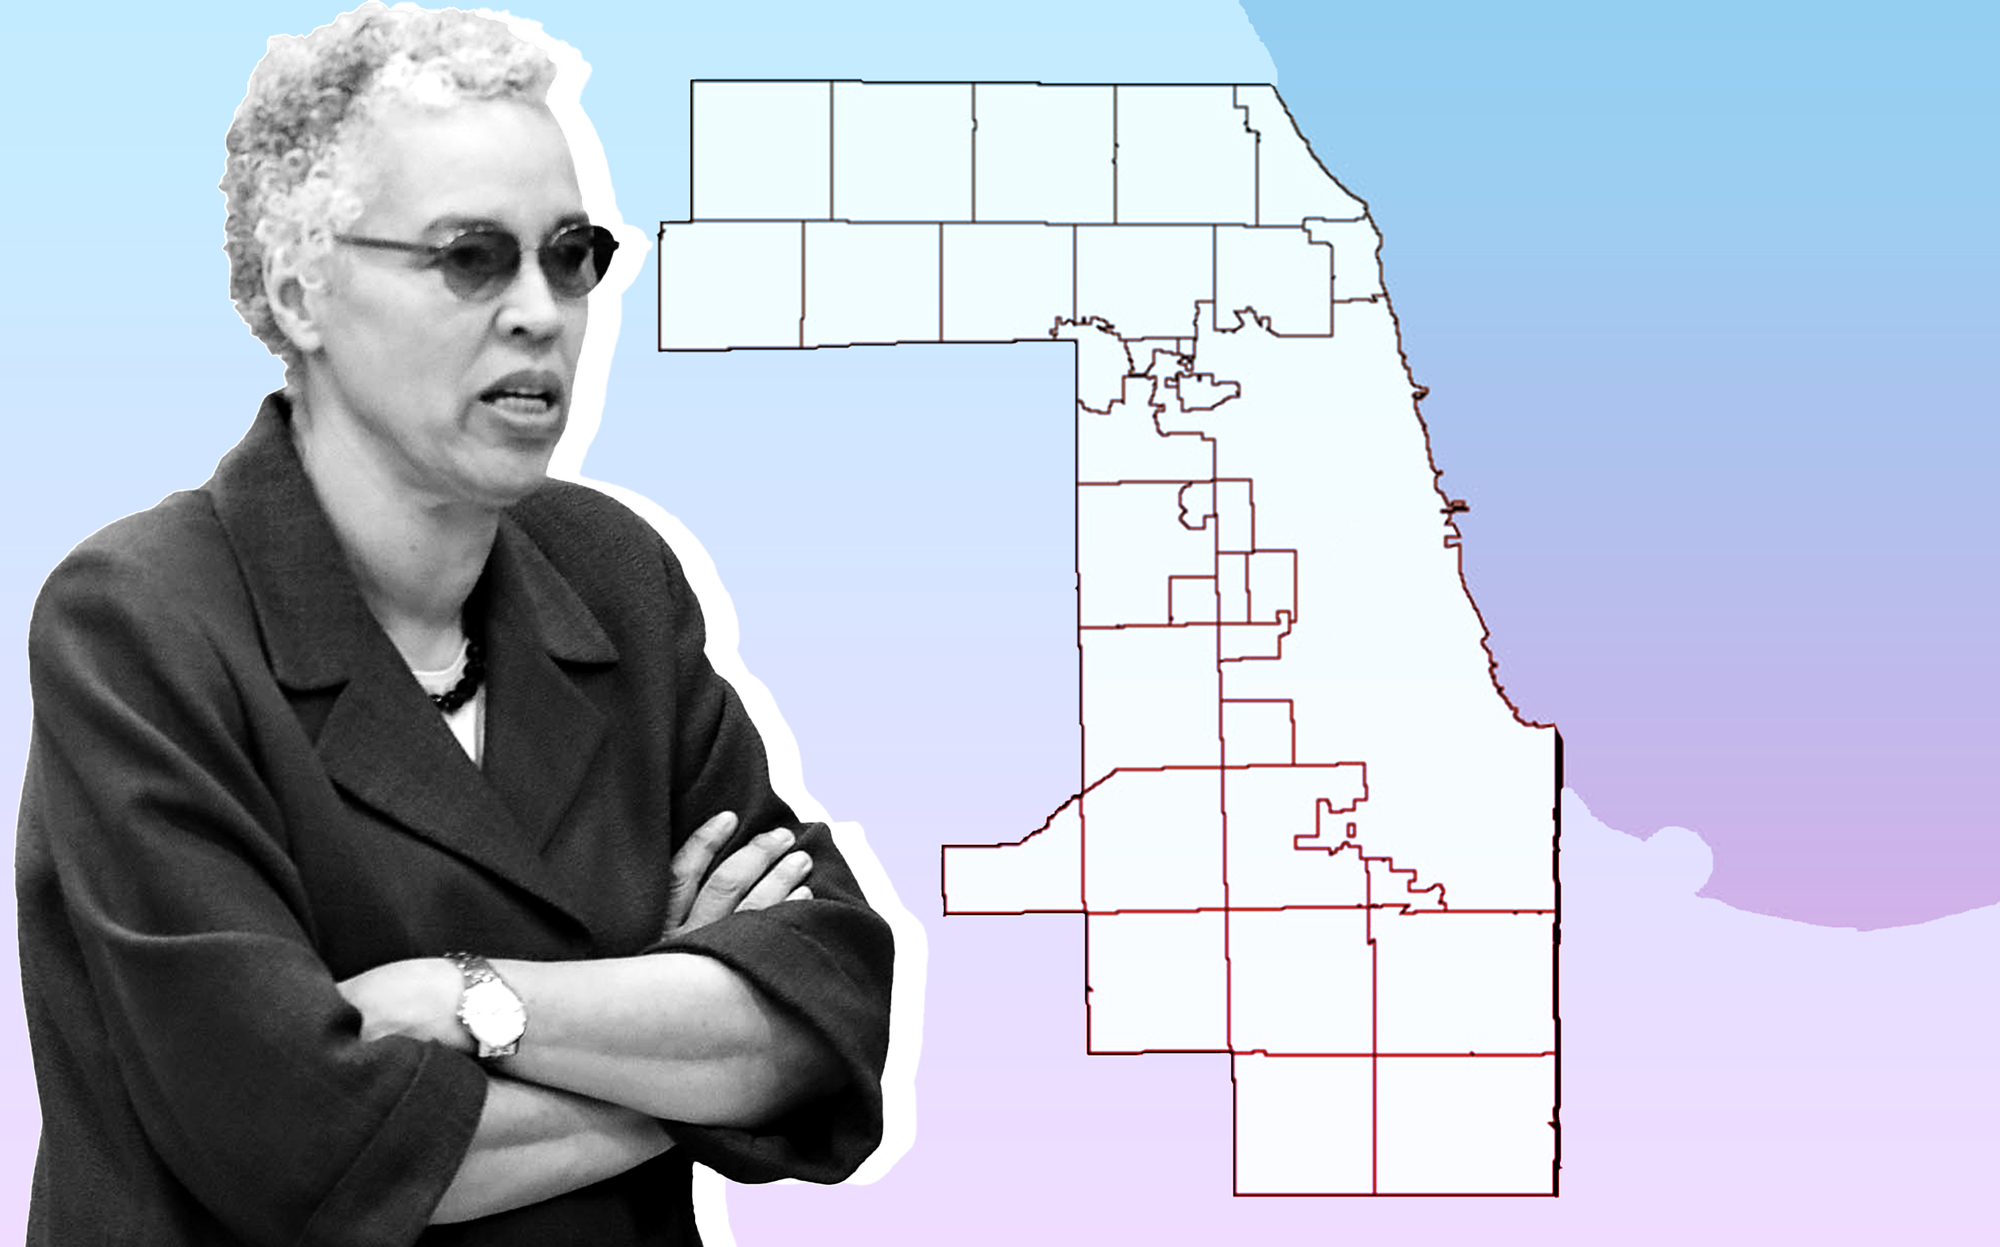 Cook County Board President Toni Preckwinkle announced the $10 million Community Recovery Fund that targets independent contractors and small businesses affected by the coronavirus. (Credit: Preckwinkle by Scott Olson/Getty Images)